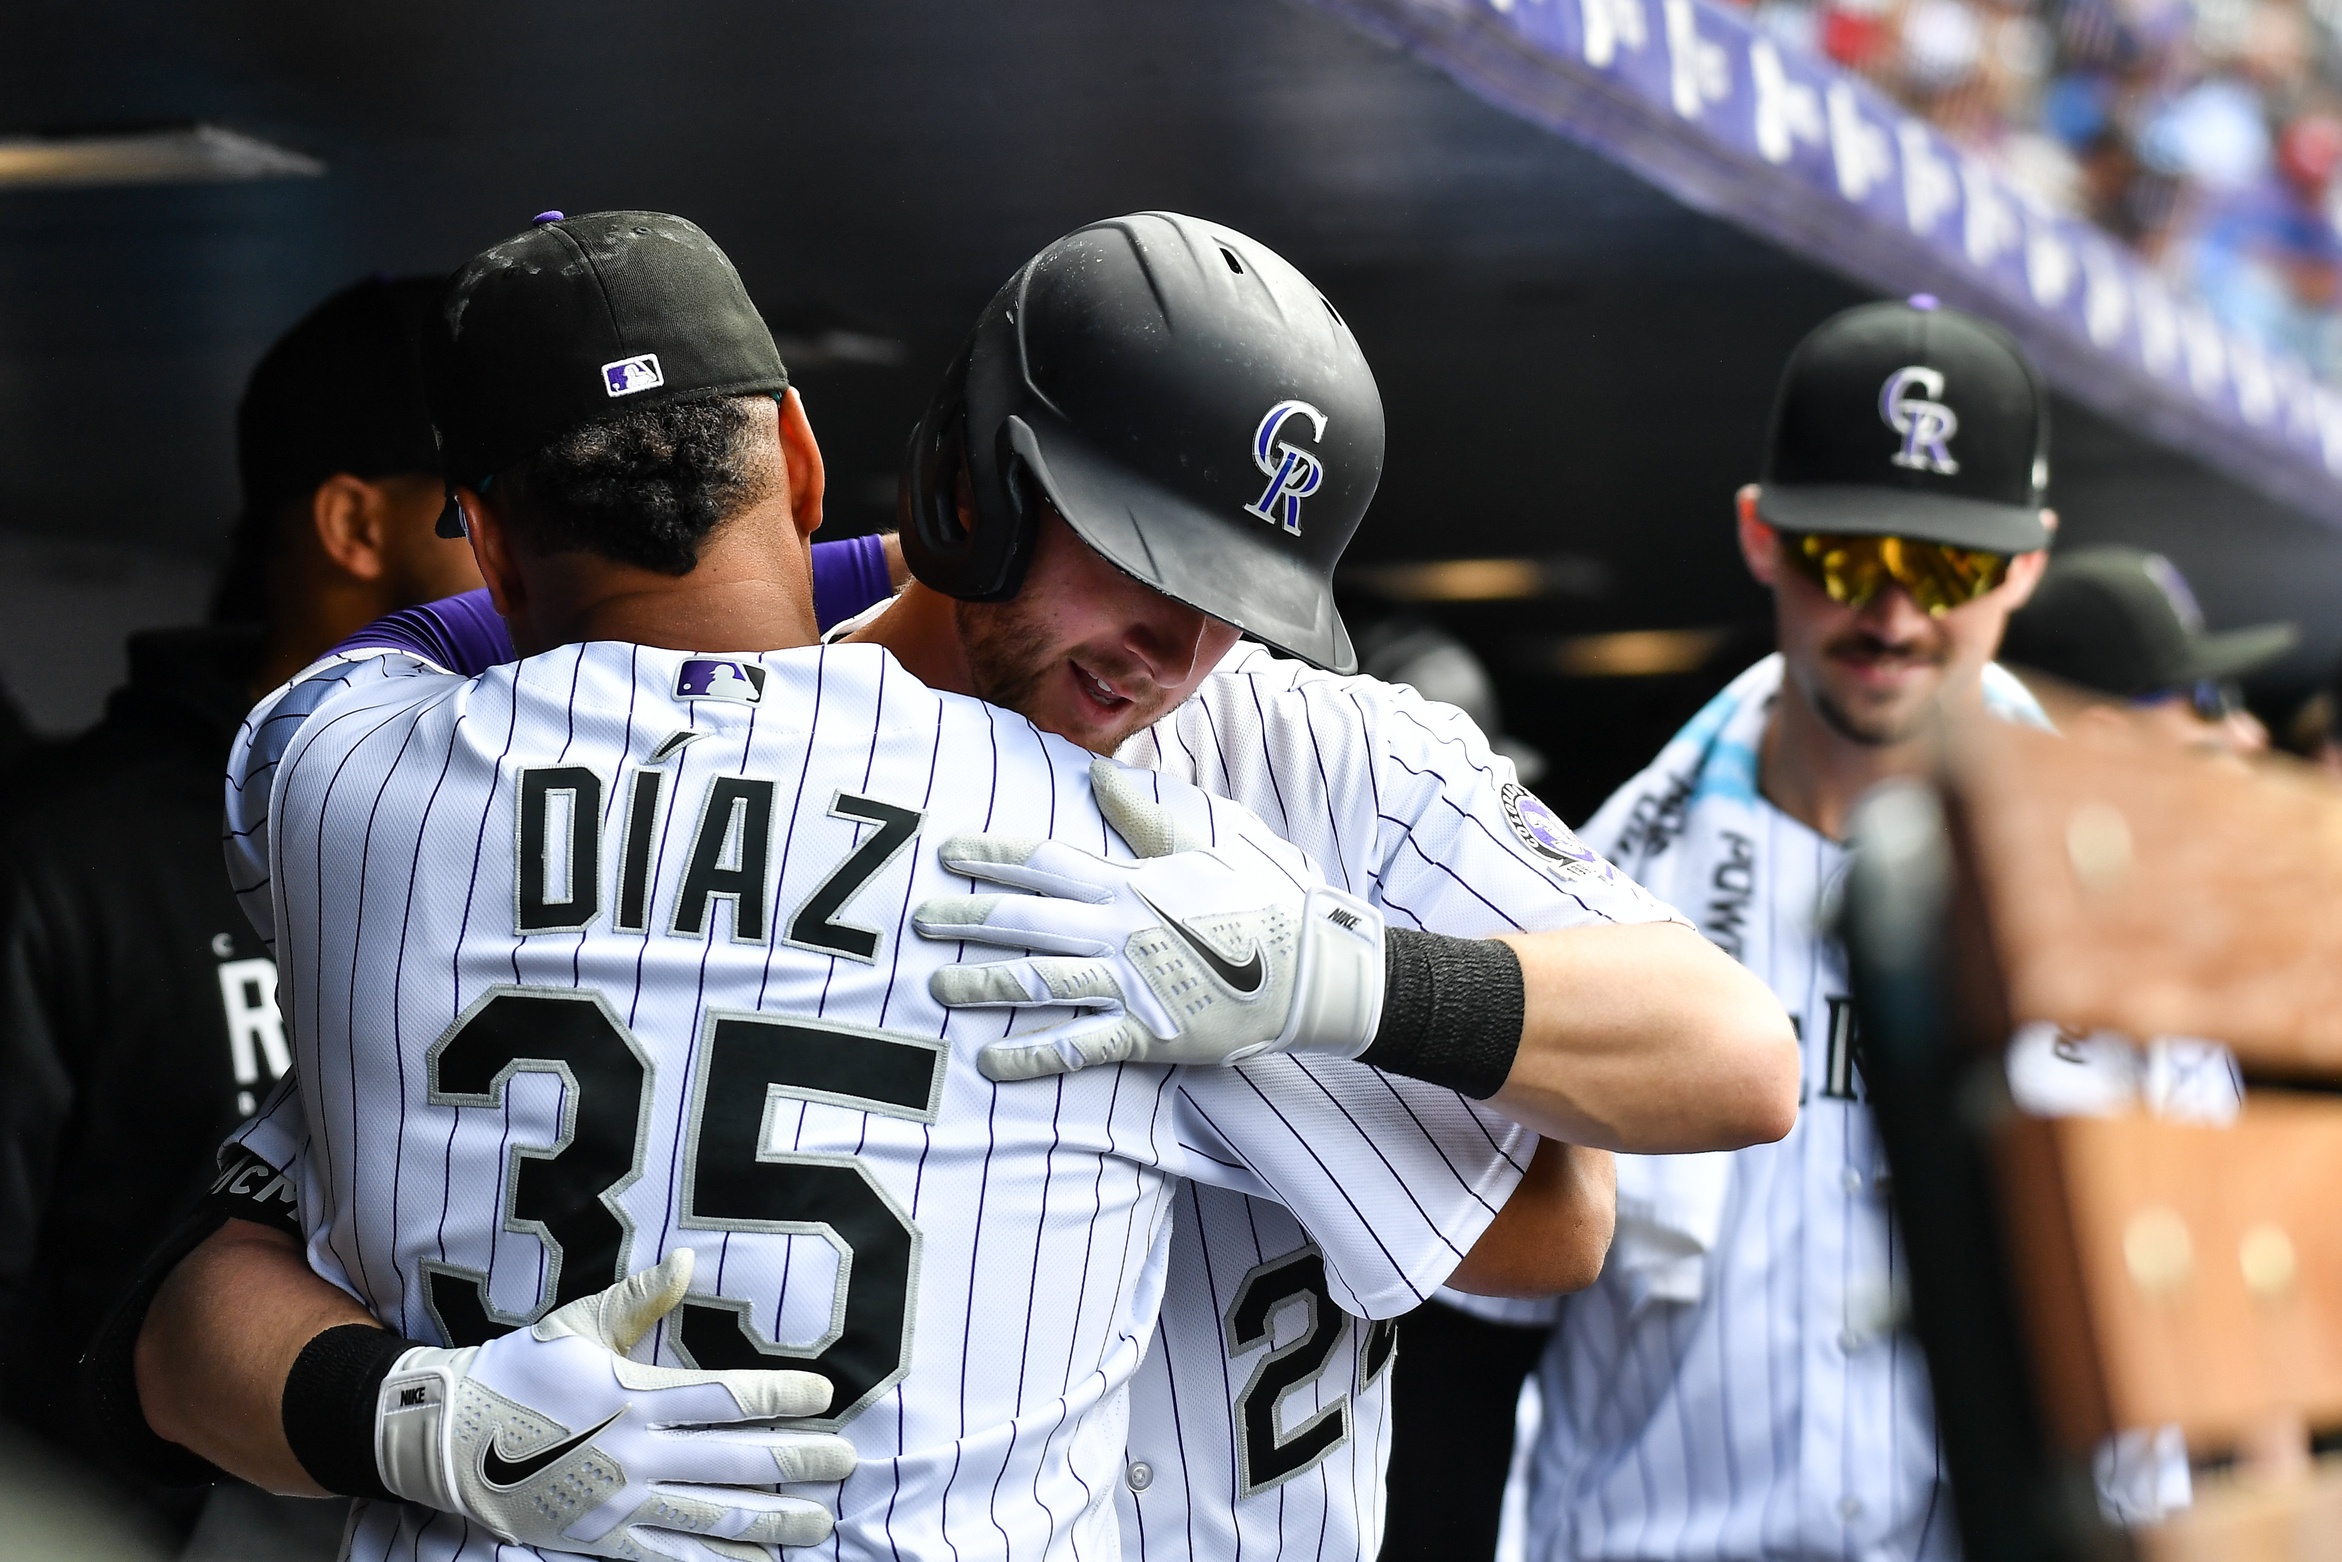 The Rockies might not actually be the worst team in Colorado